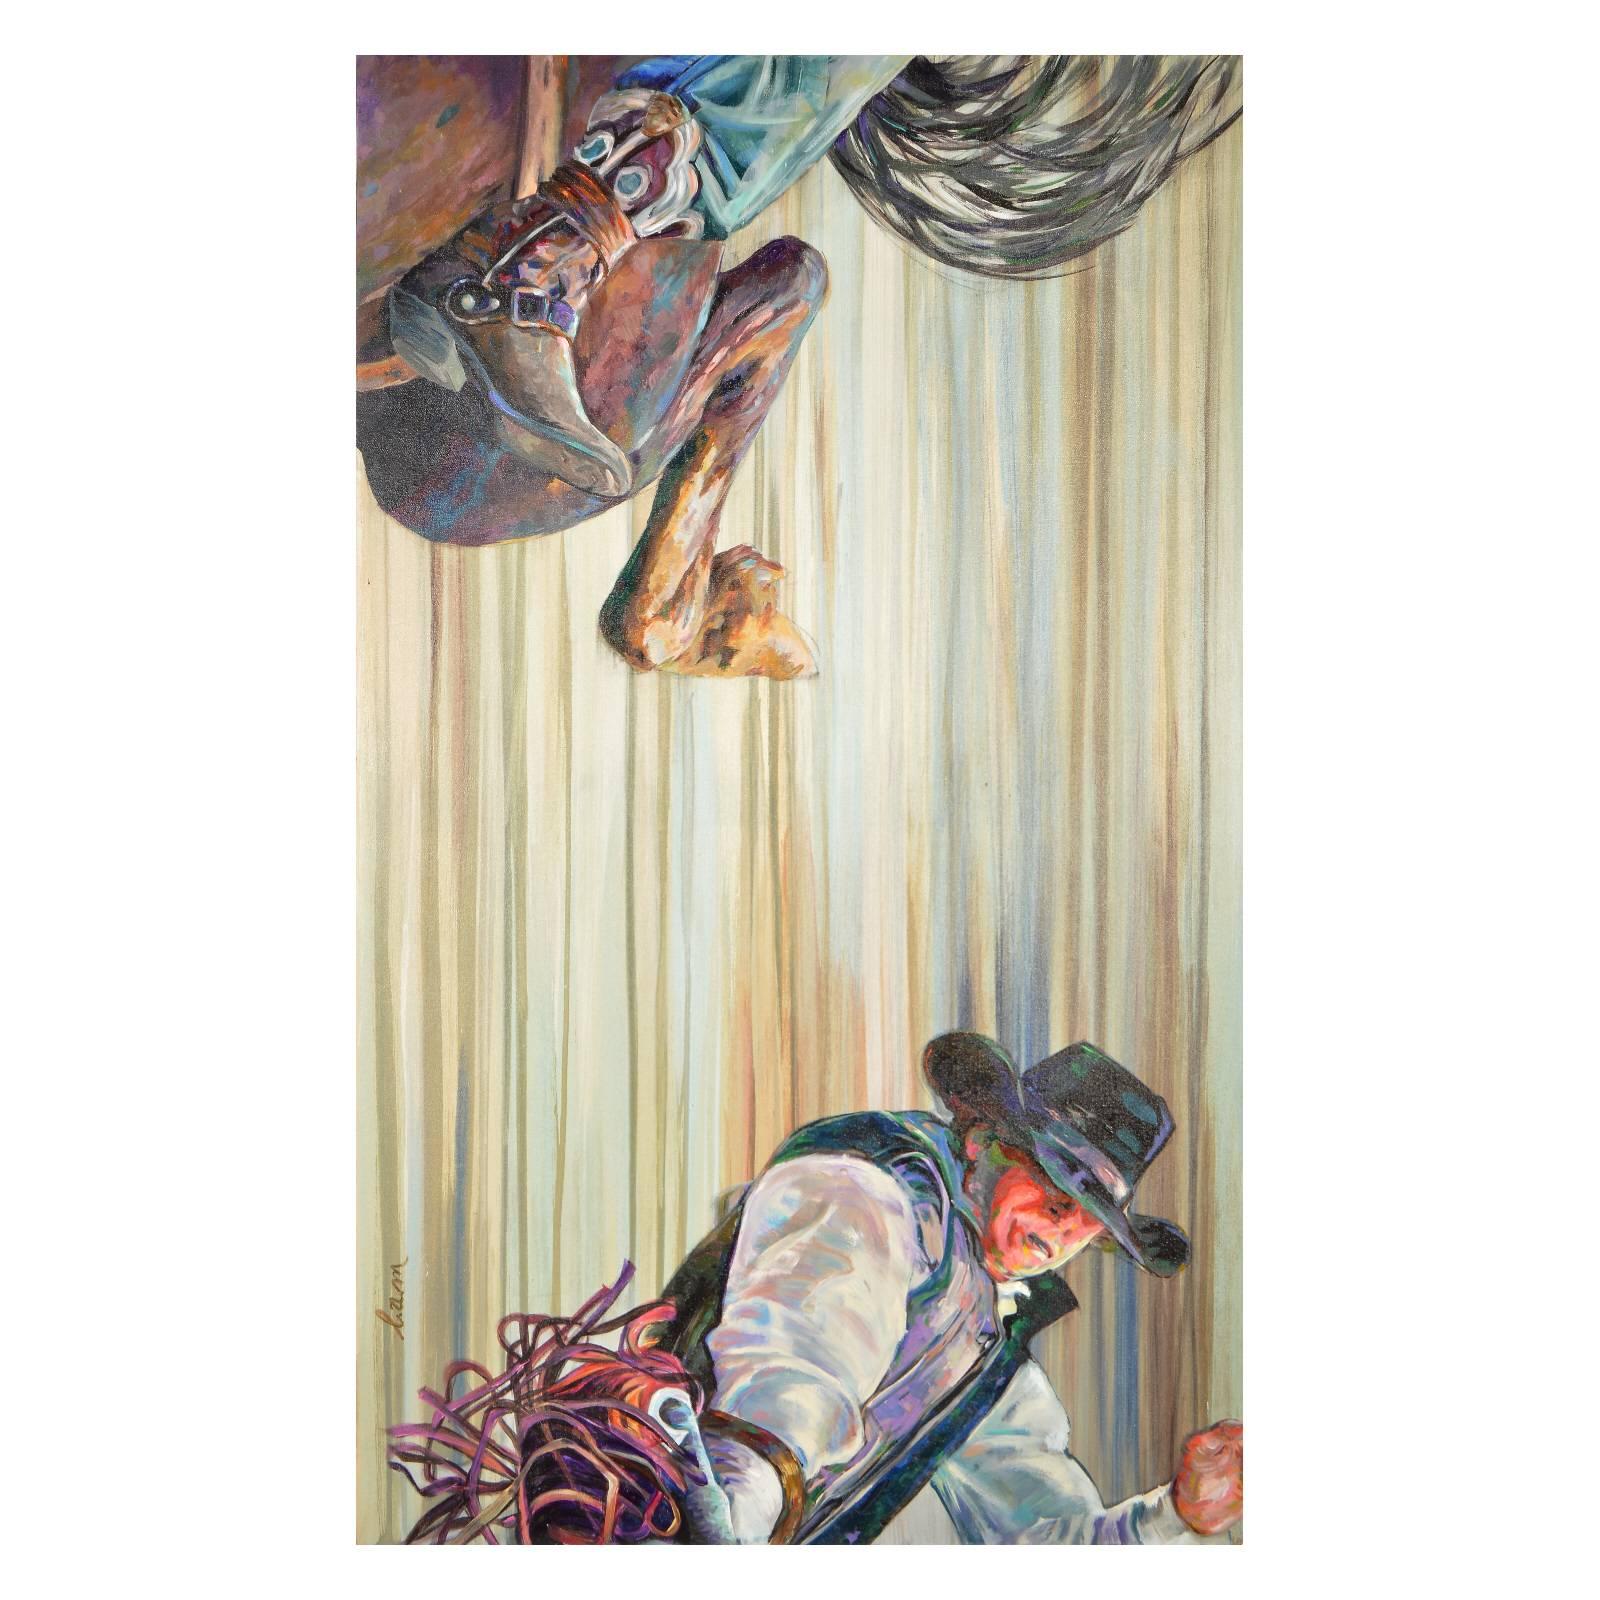 Flipping Cowboy #2 Rodeo Cowboy on a Bronco Horse Original Painting For Sale